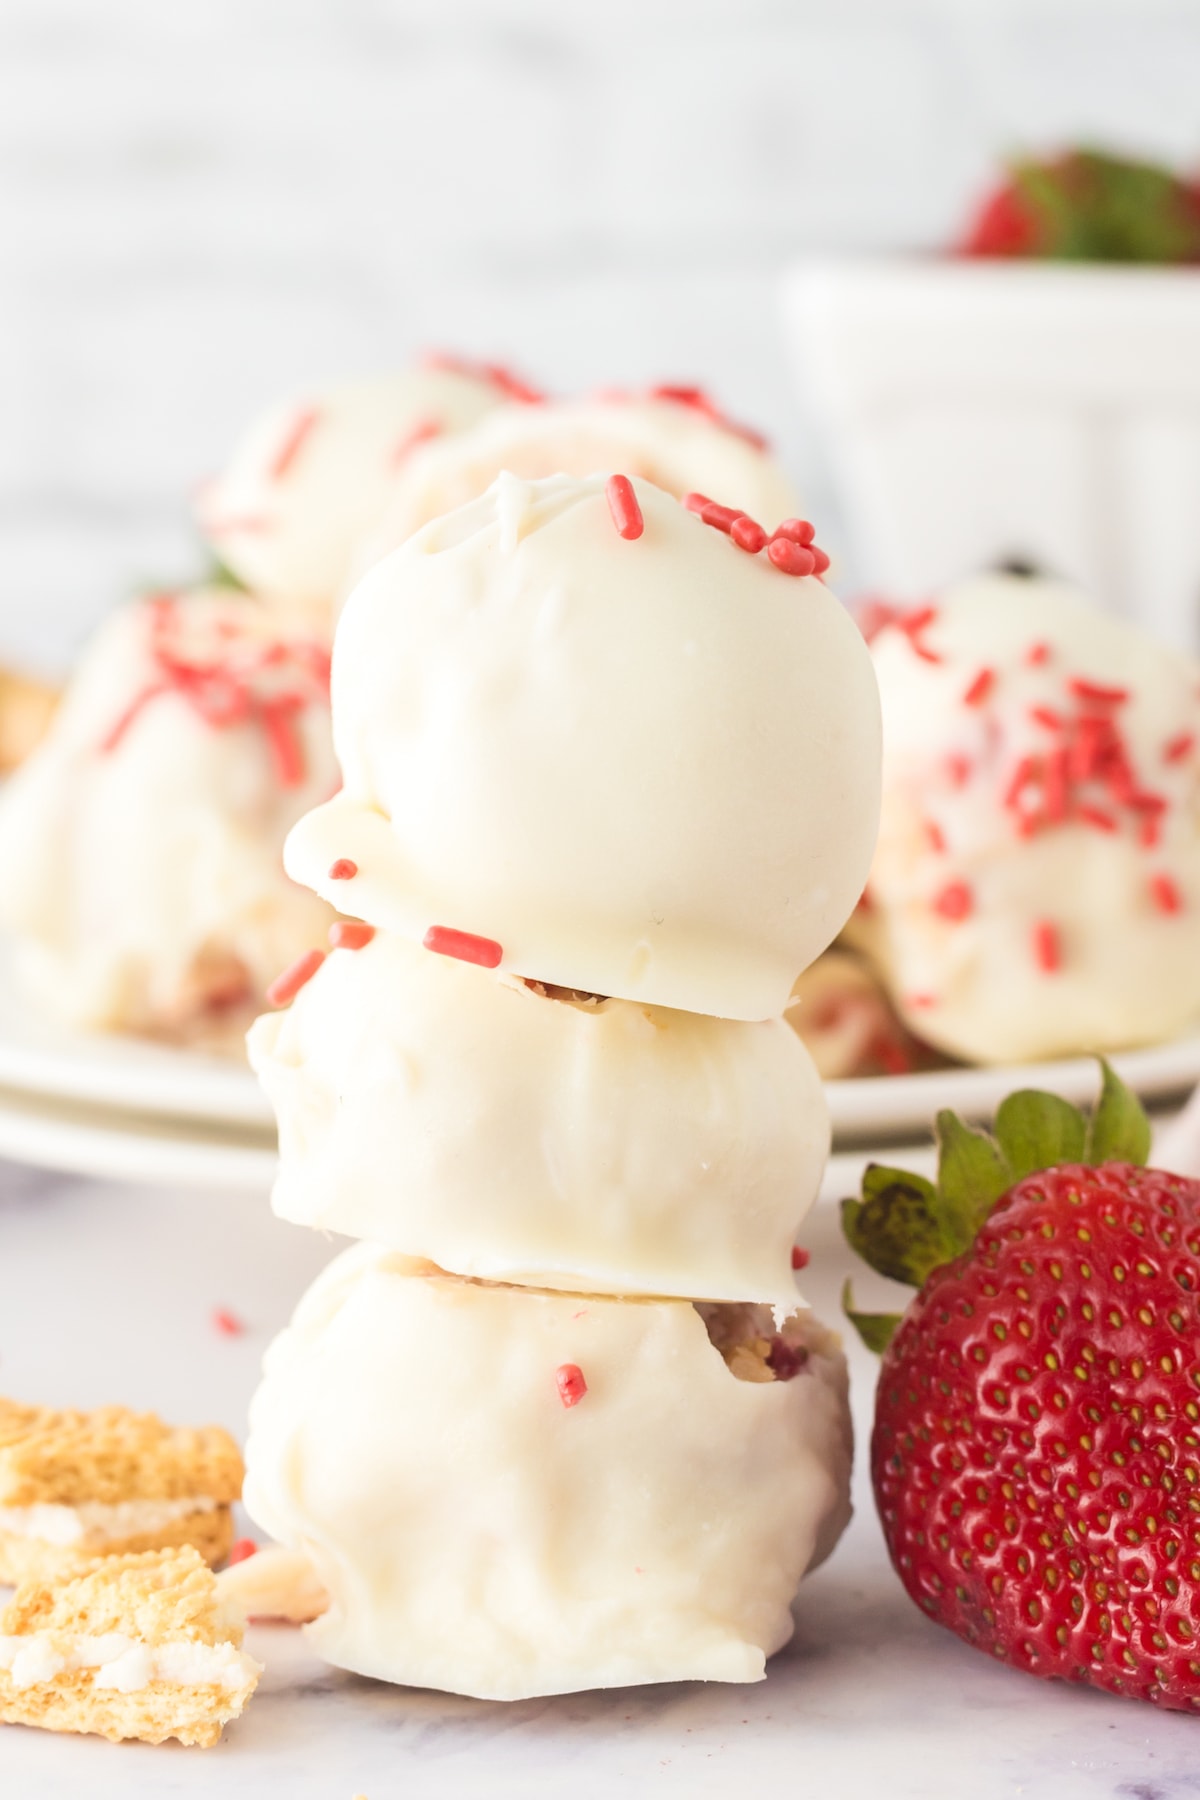 a stack of strawberry shortcake truffles dipped in white chocolate with pink sprinkles on top 